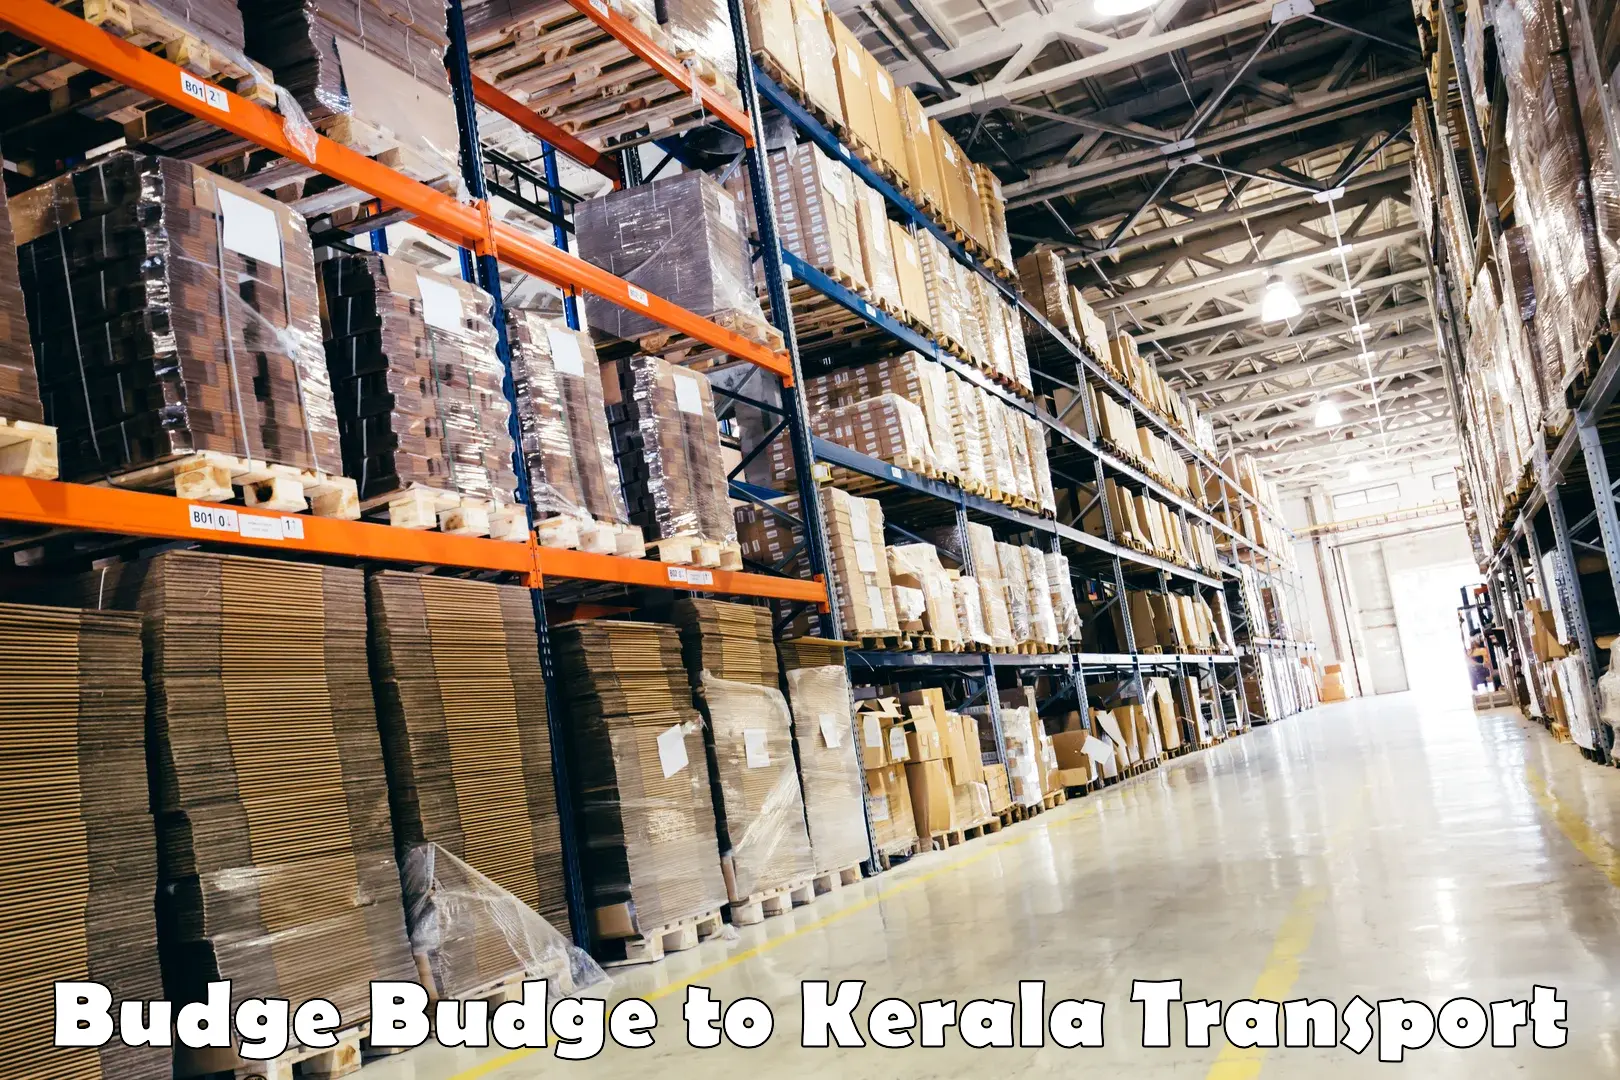 Nearby transport service Budge Budge to Kerala